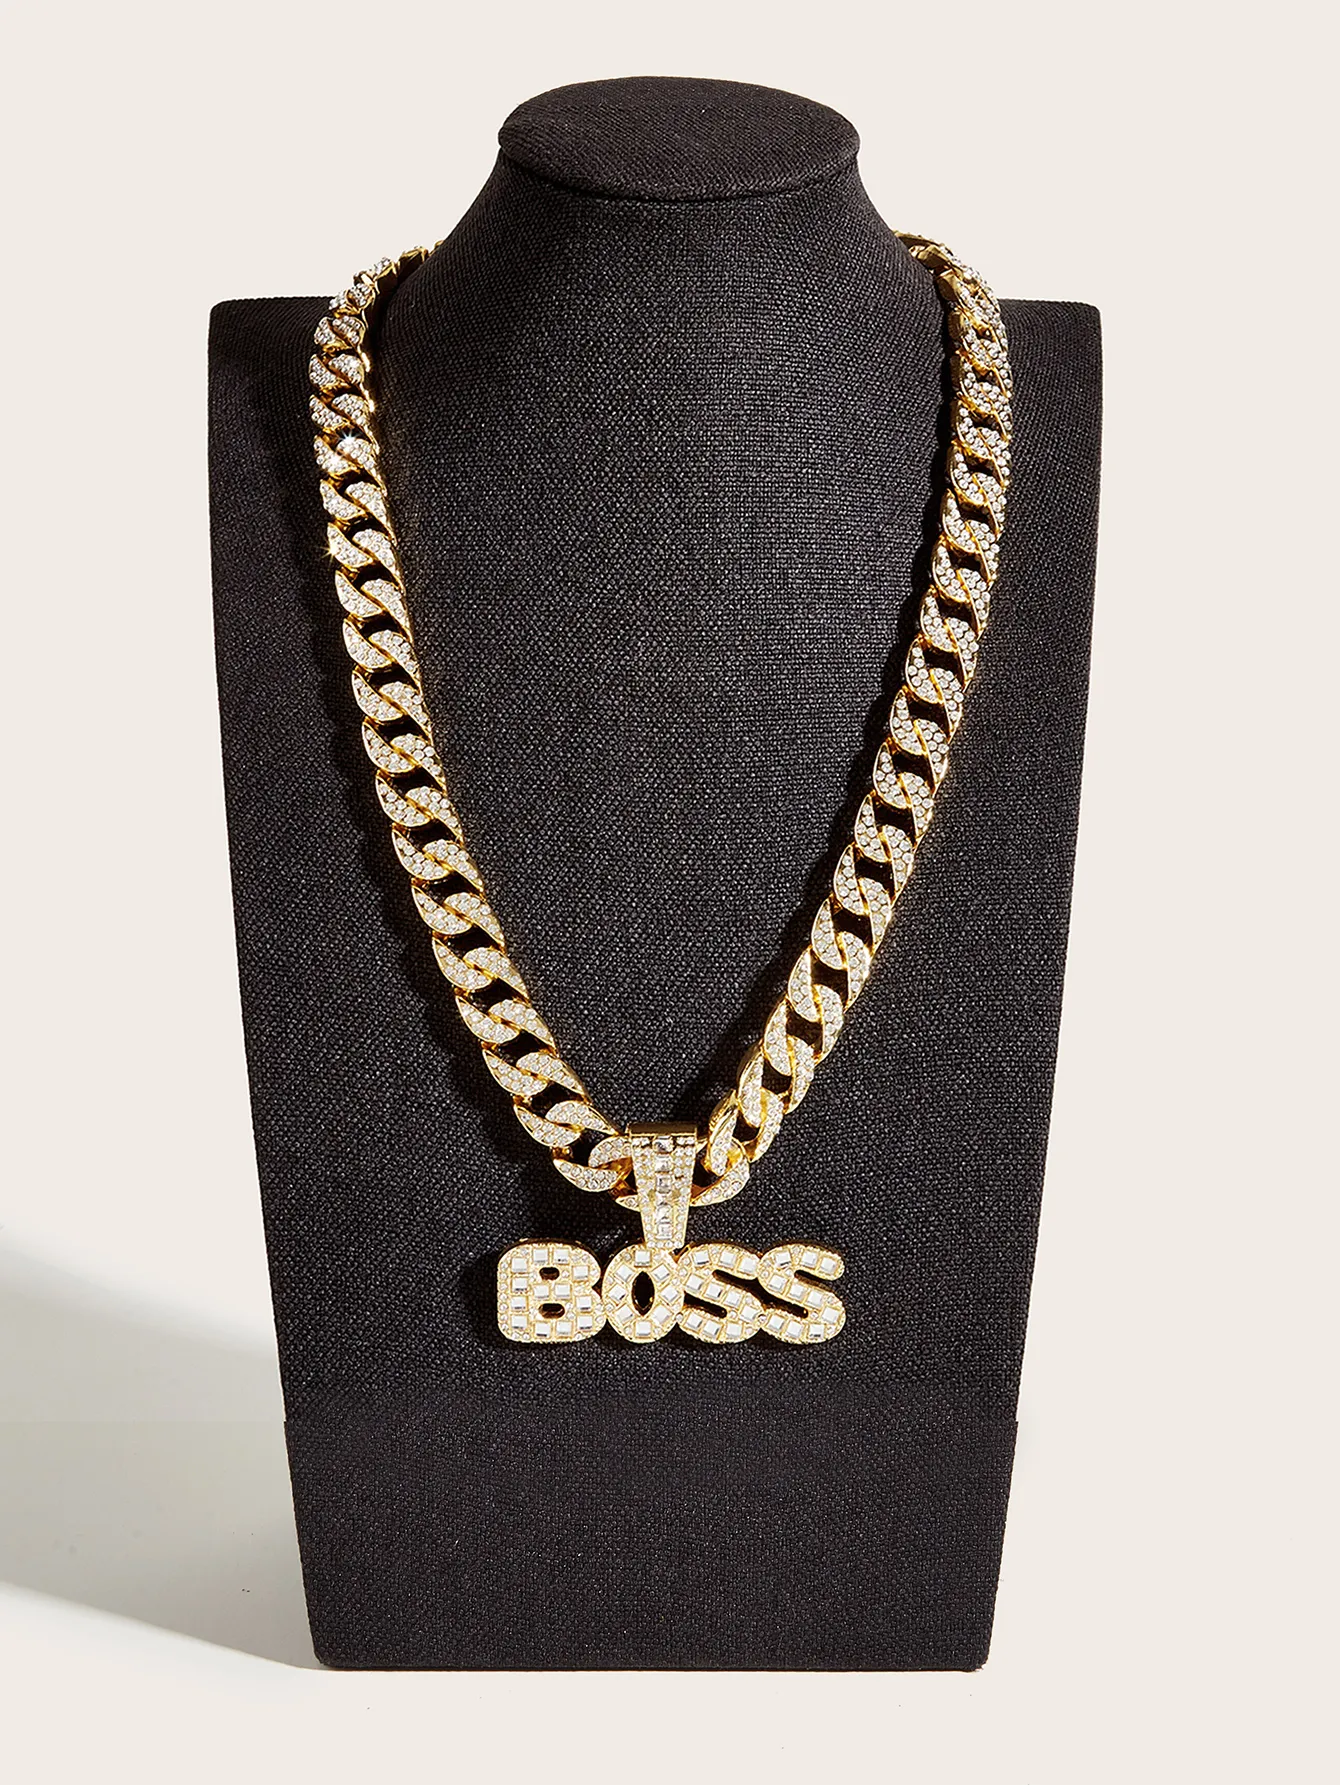 BOSS Stainless Steel GQ Kane Necklace 1580536